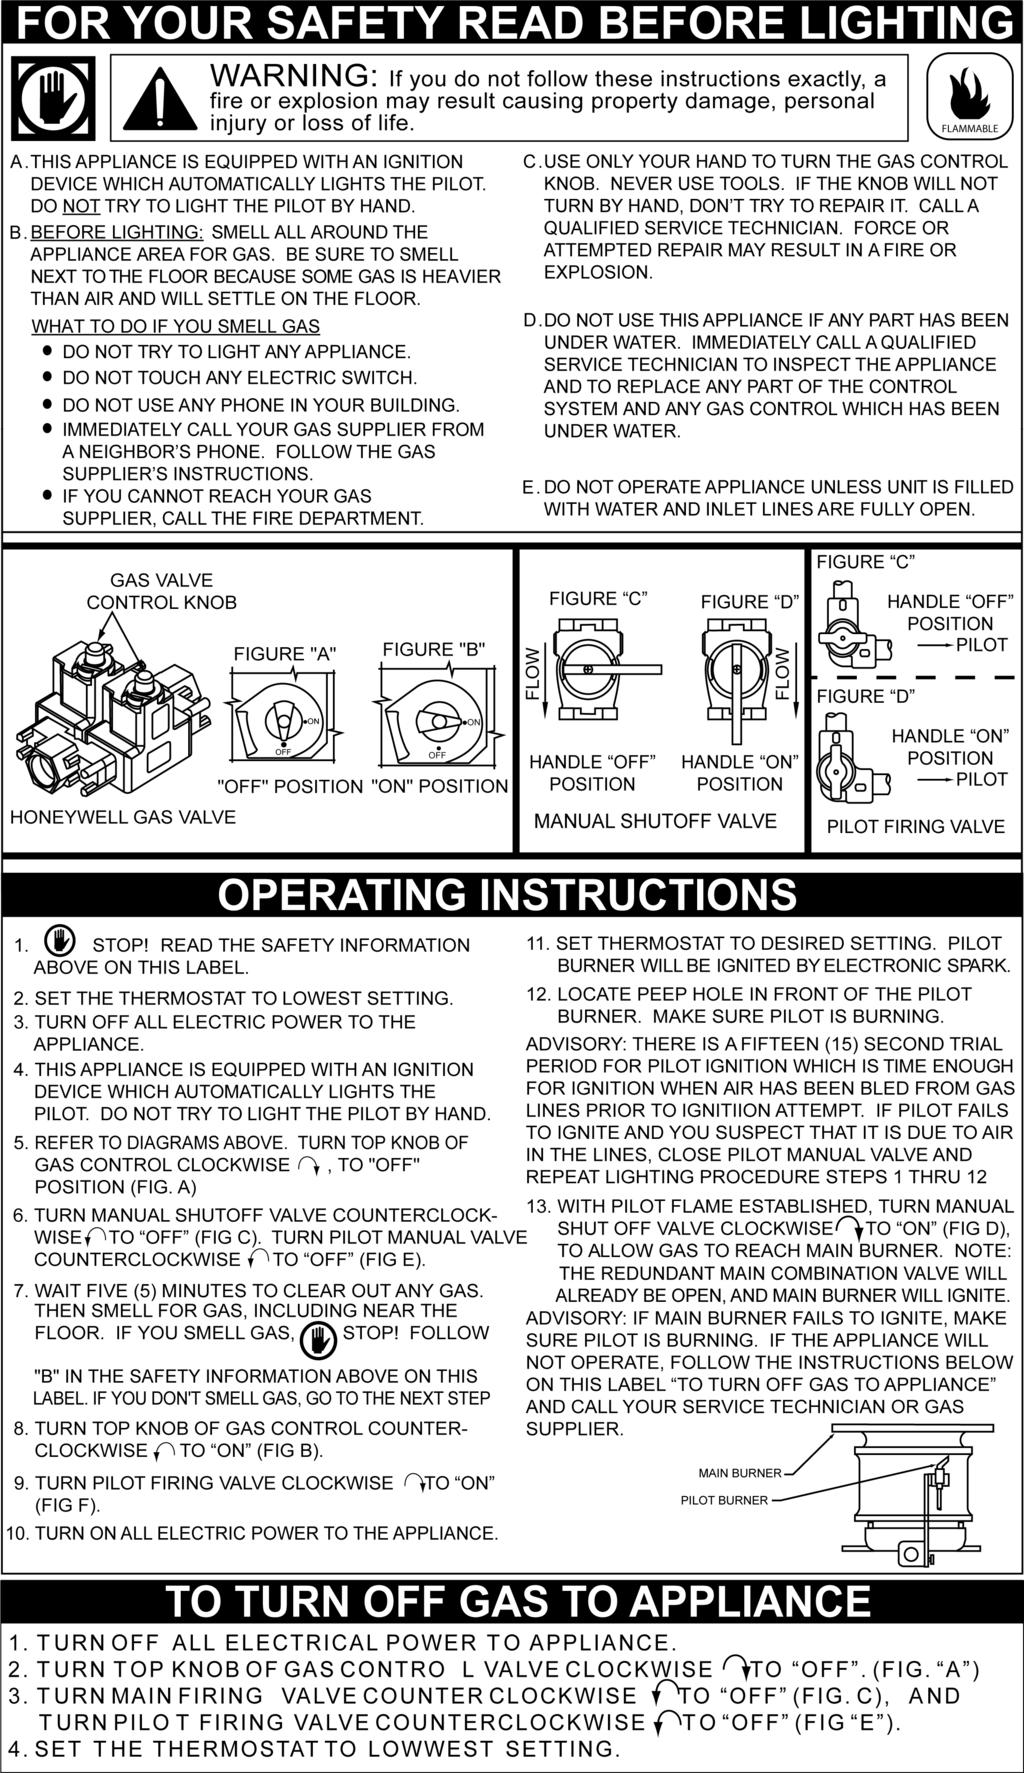 LIGHTING AND OPERATING INSTRUCTIONS